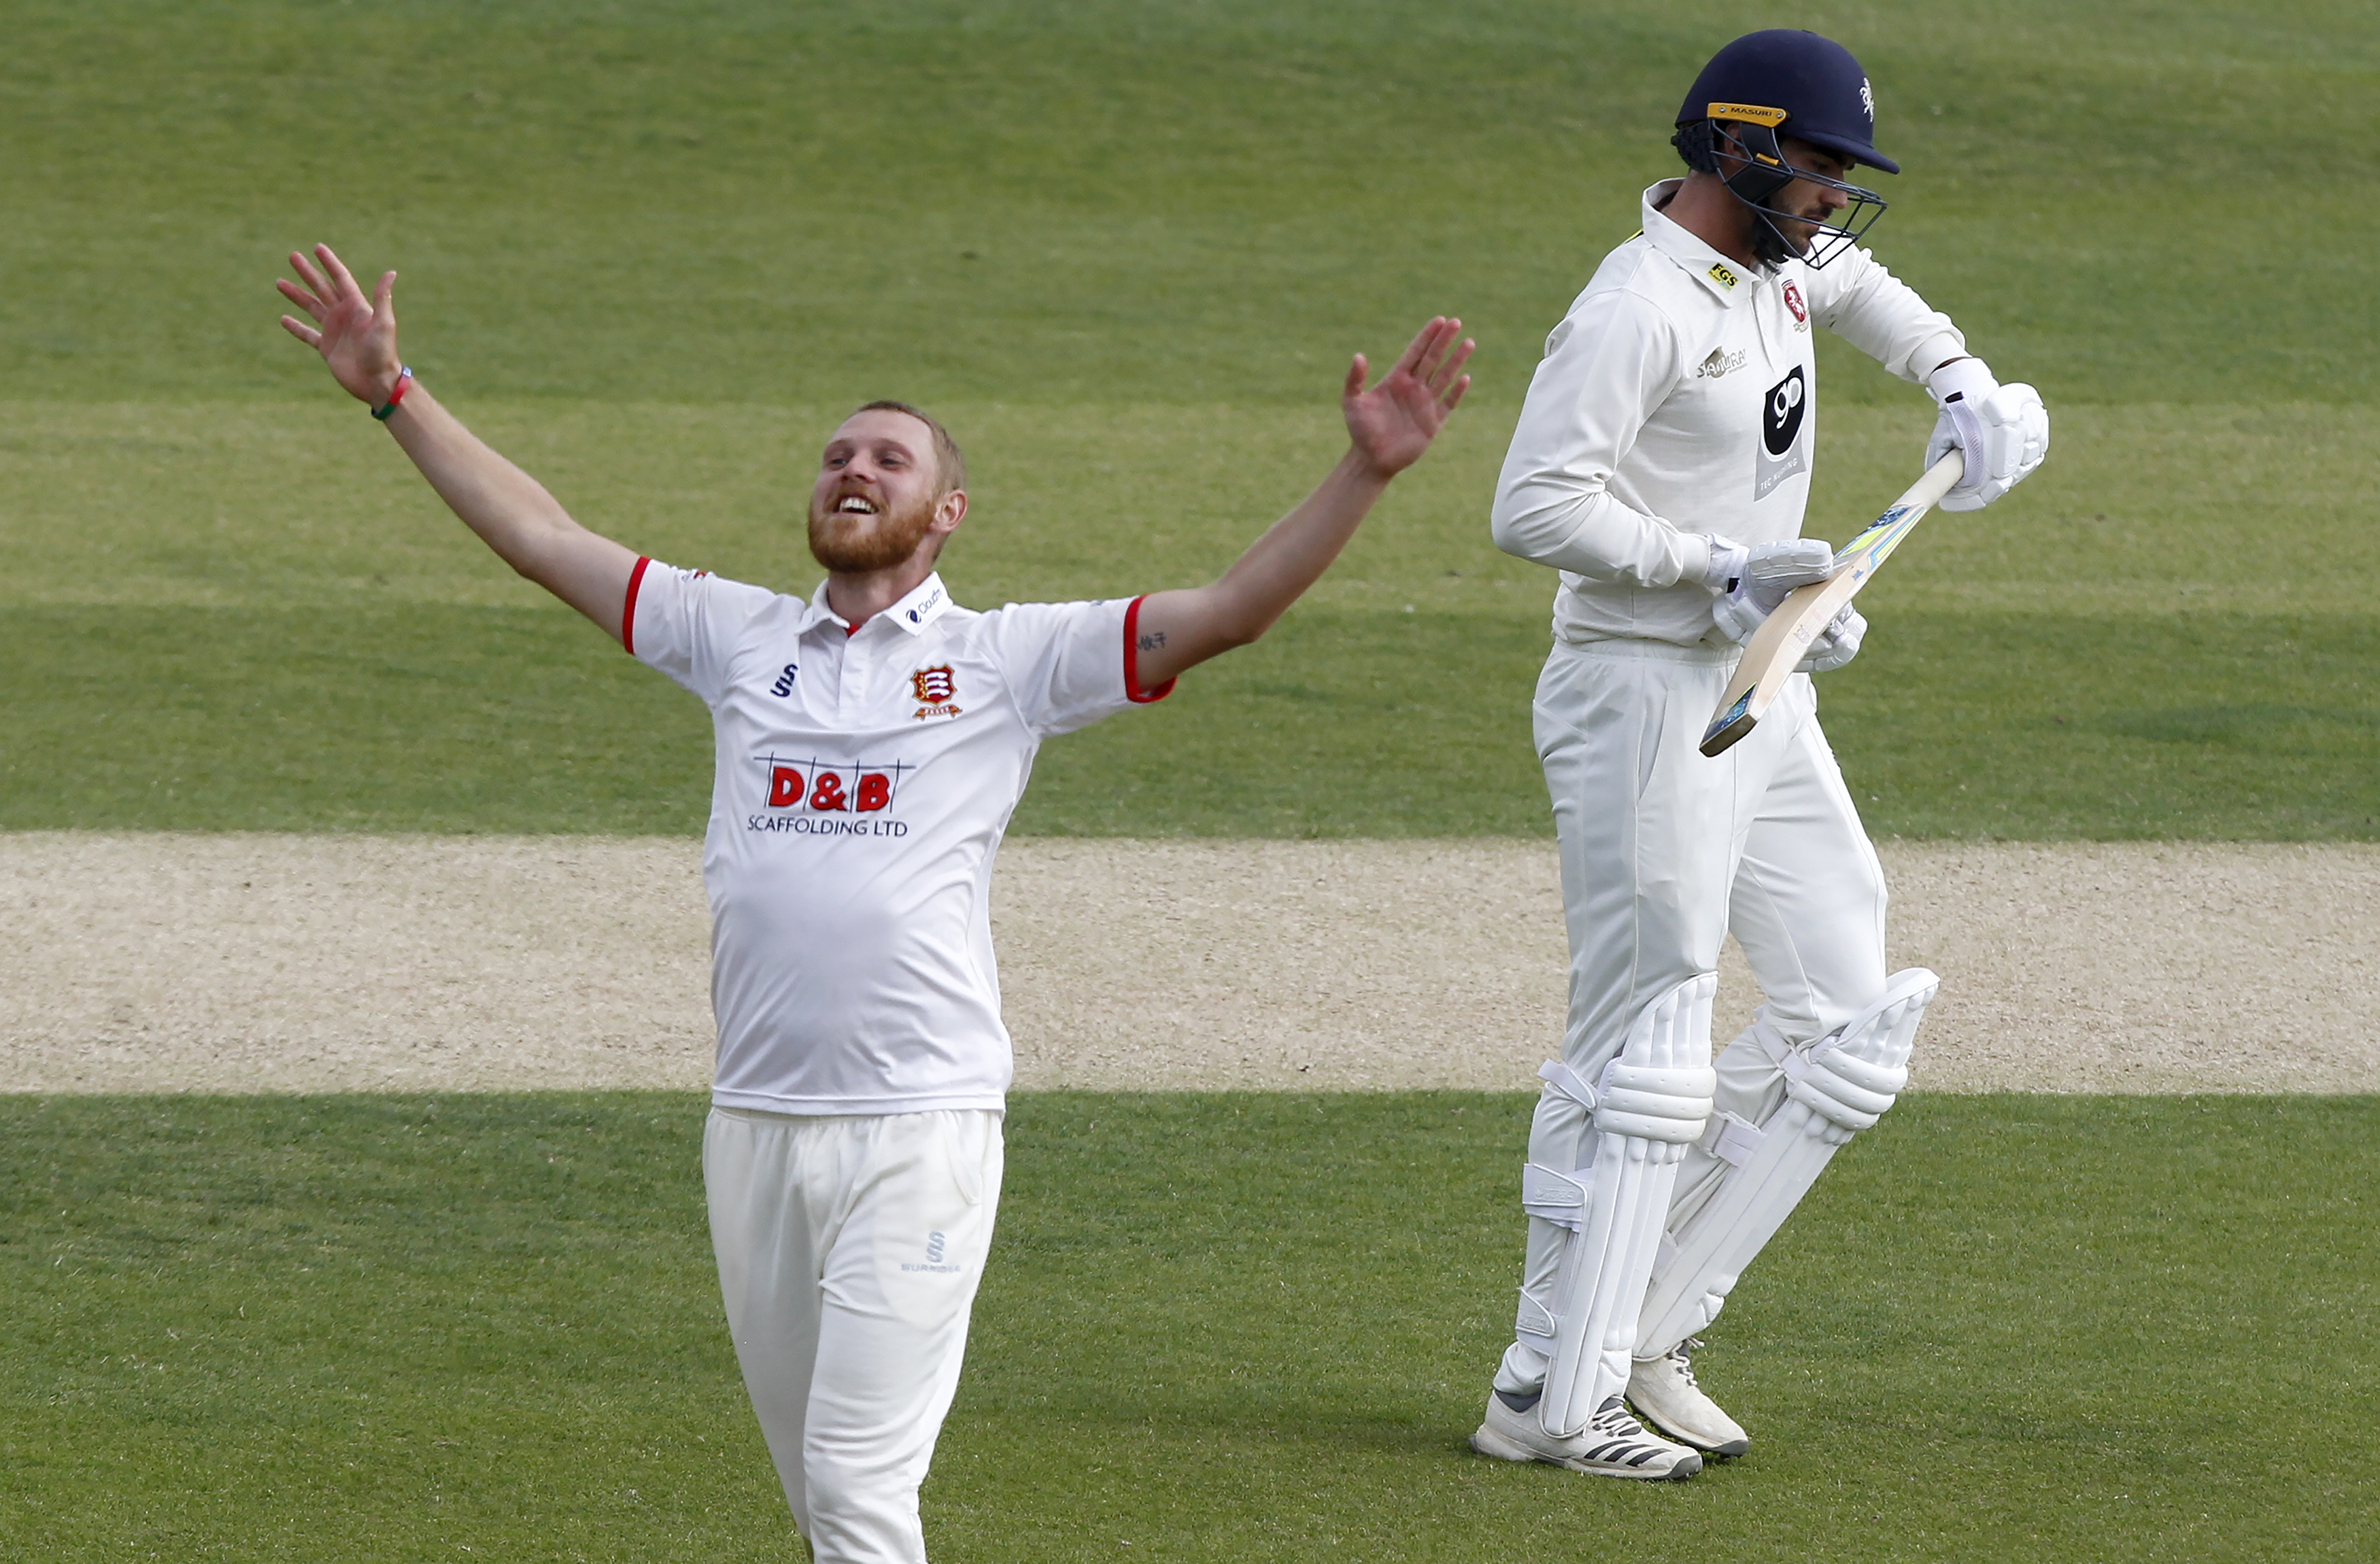 Jamie Porter of Essex celebrates taking the wicket of Grant Stewart during Essex vs Kent in the Bob Willis Trophy at The Cloudfm County Ground on 3rd August 2020